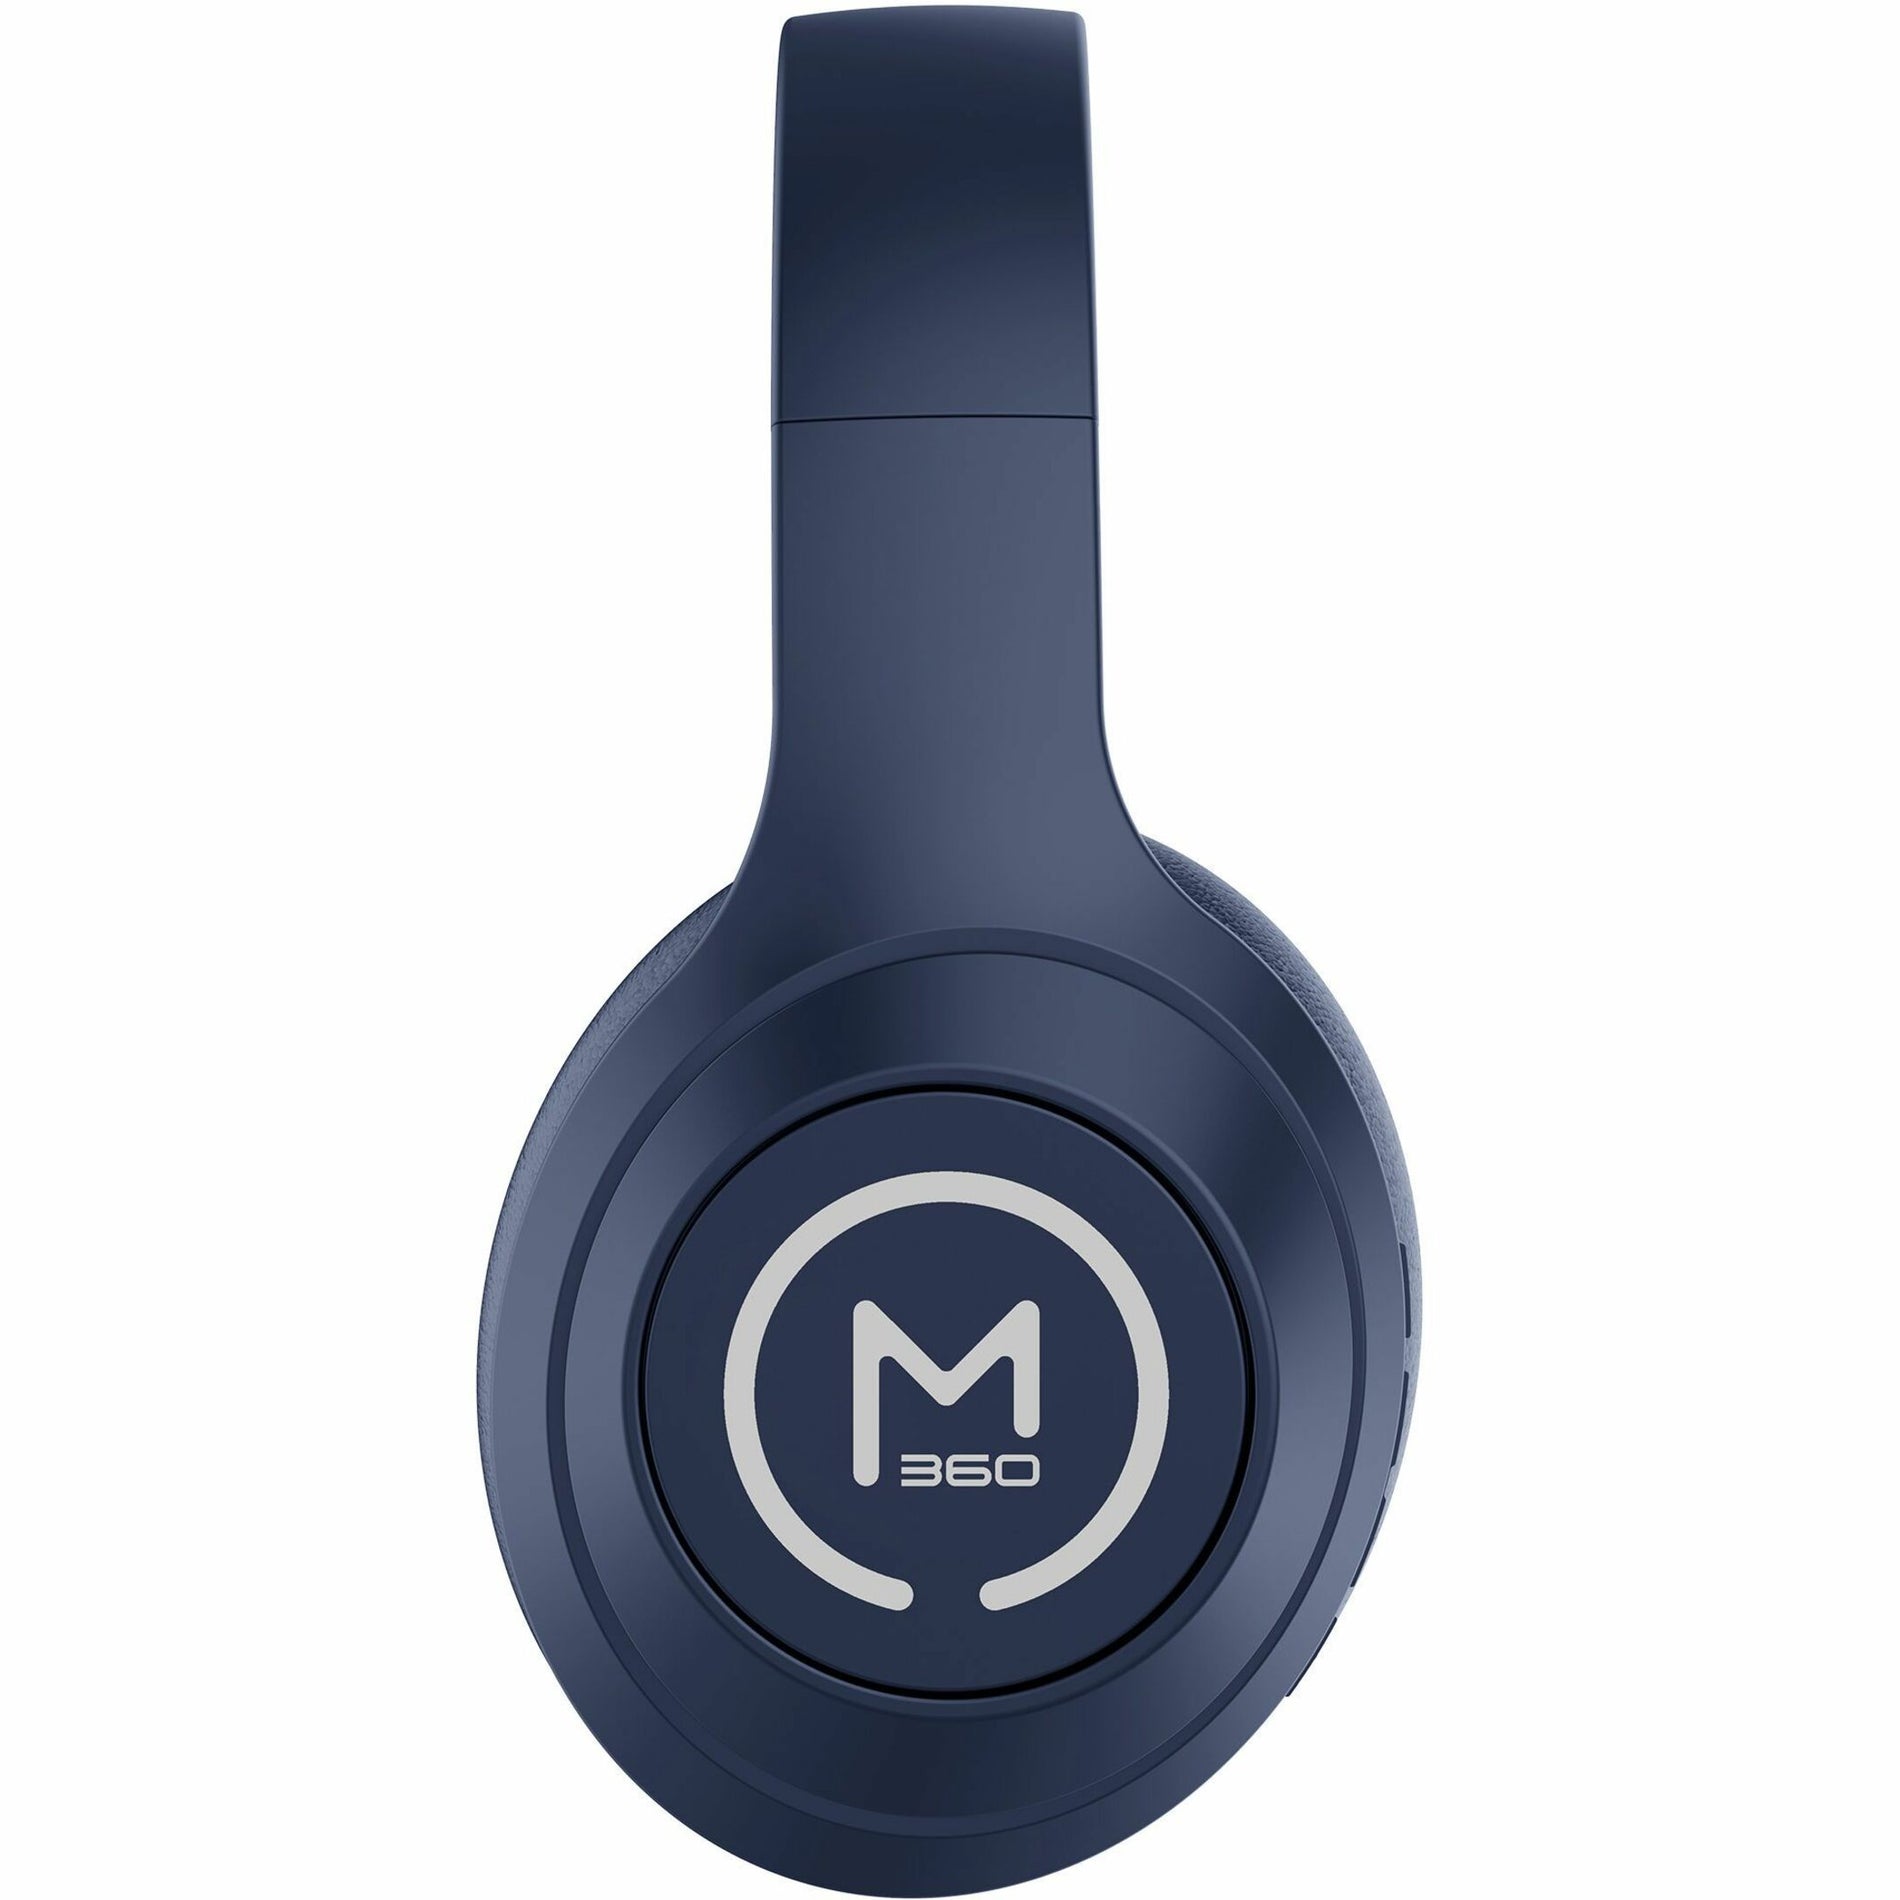 Morpheus 360 HP6500L COMFORT+ Wireless Stereo Headphone, Over-the-ear, Over-the-head, Blue